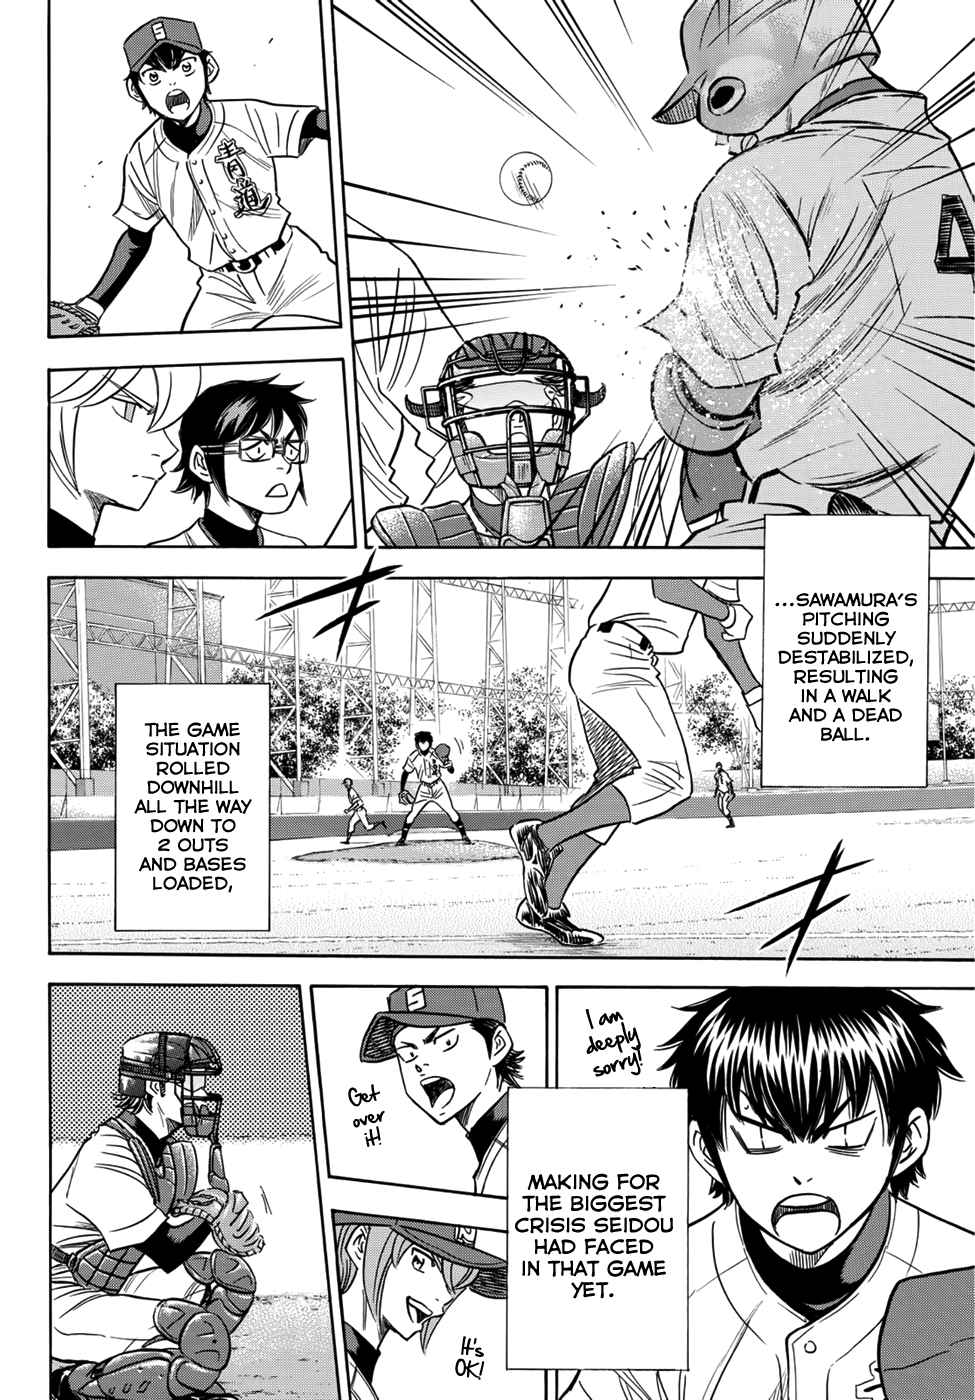 Diamond no Ace Act II Vol. 4 Ch. 29 Expectations or Aspirations?